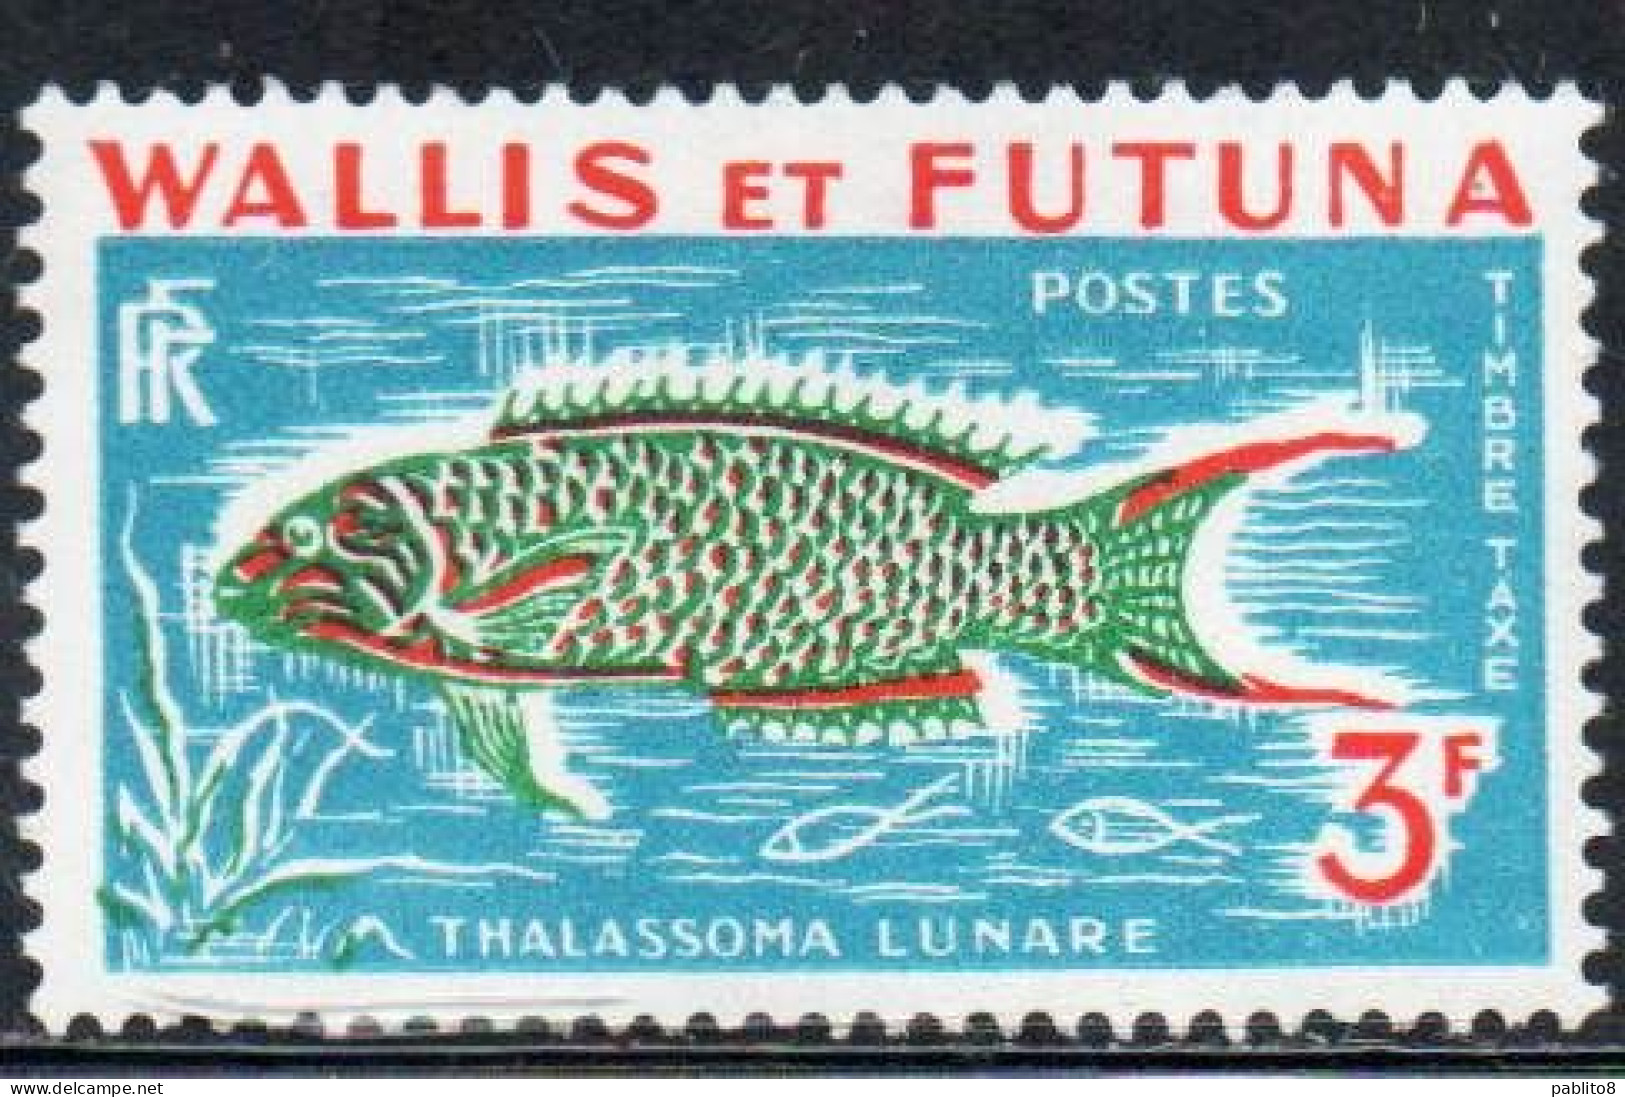 WALLIS AND FUTUNA ISLANDS 1963 POSTAGE DUE STAMPS TAXE SEGNATASSE THALASSOMA LUNARE 3fr MH - Timbres-taxe